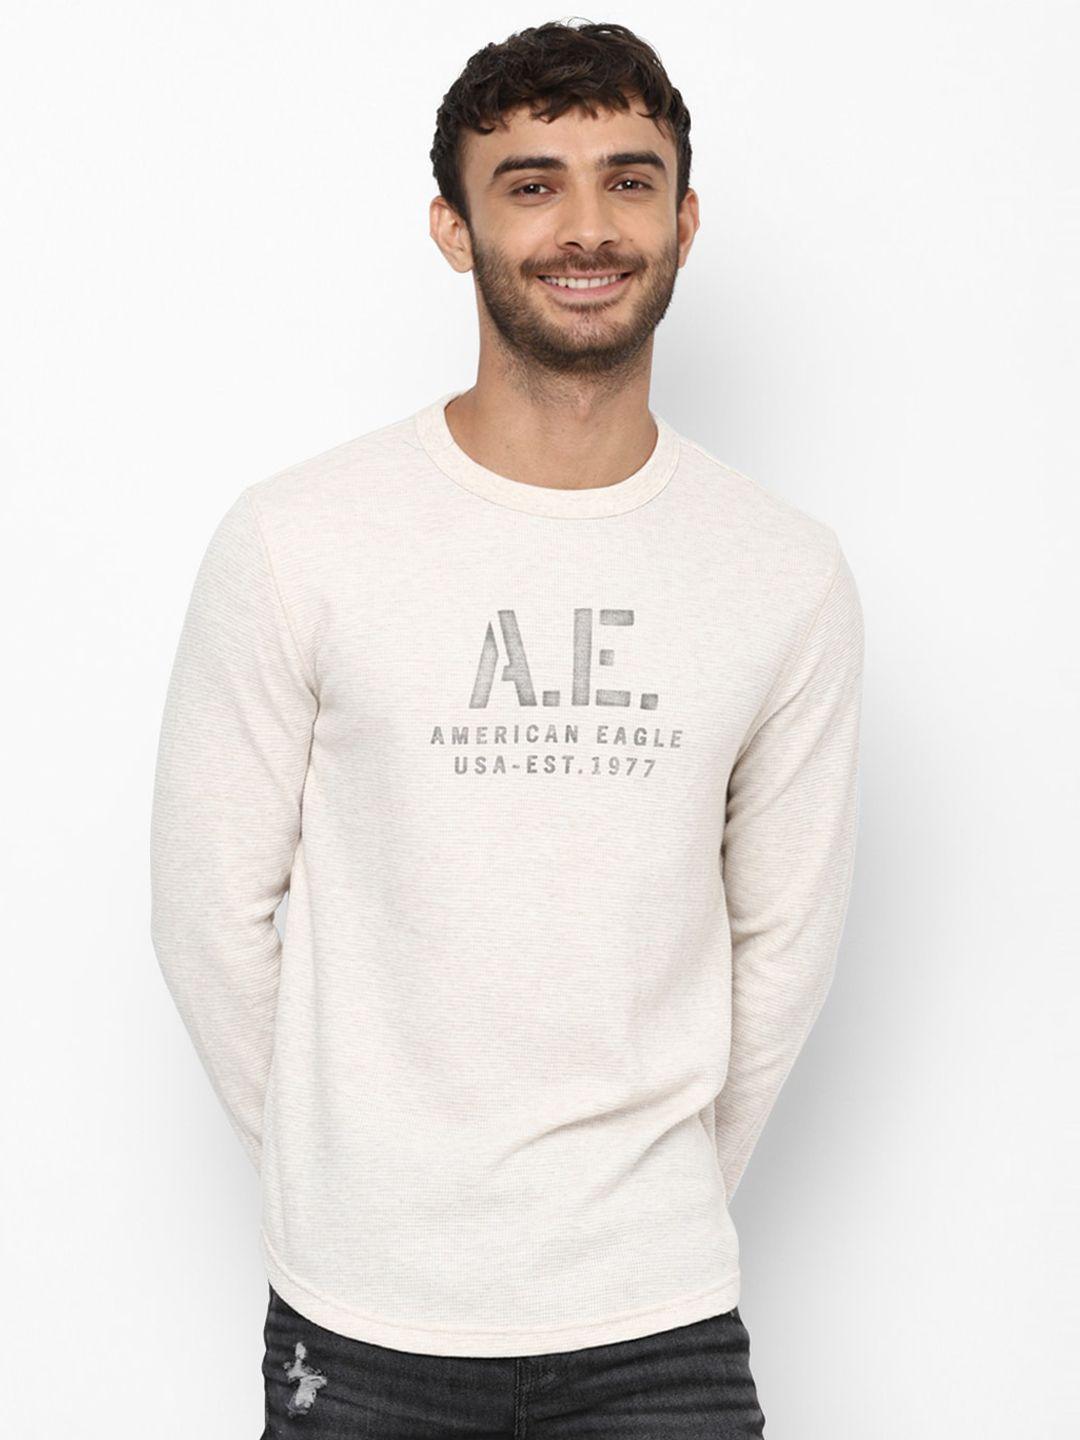 AMERICAN EAGLE OUTFITTERS Men Typography Printed Pure Cotton T-shirt